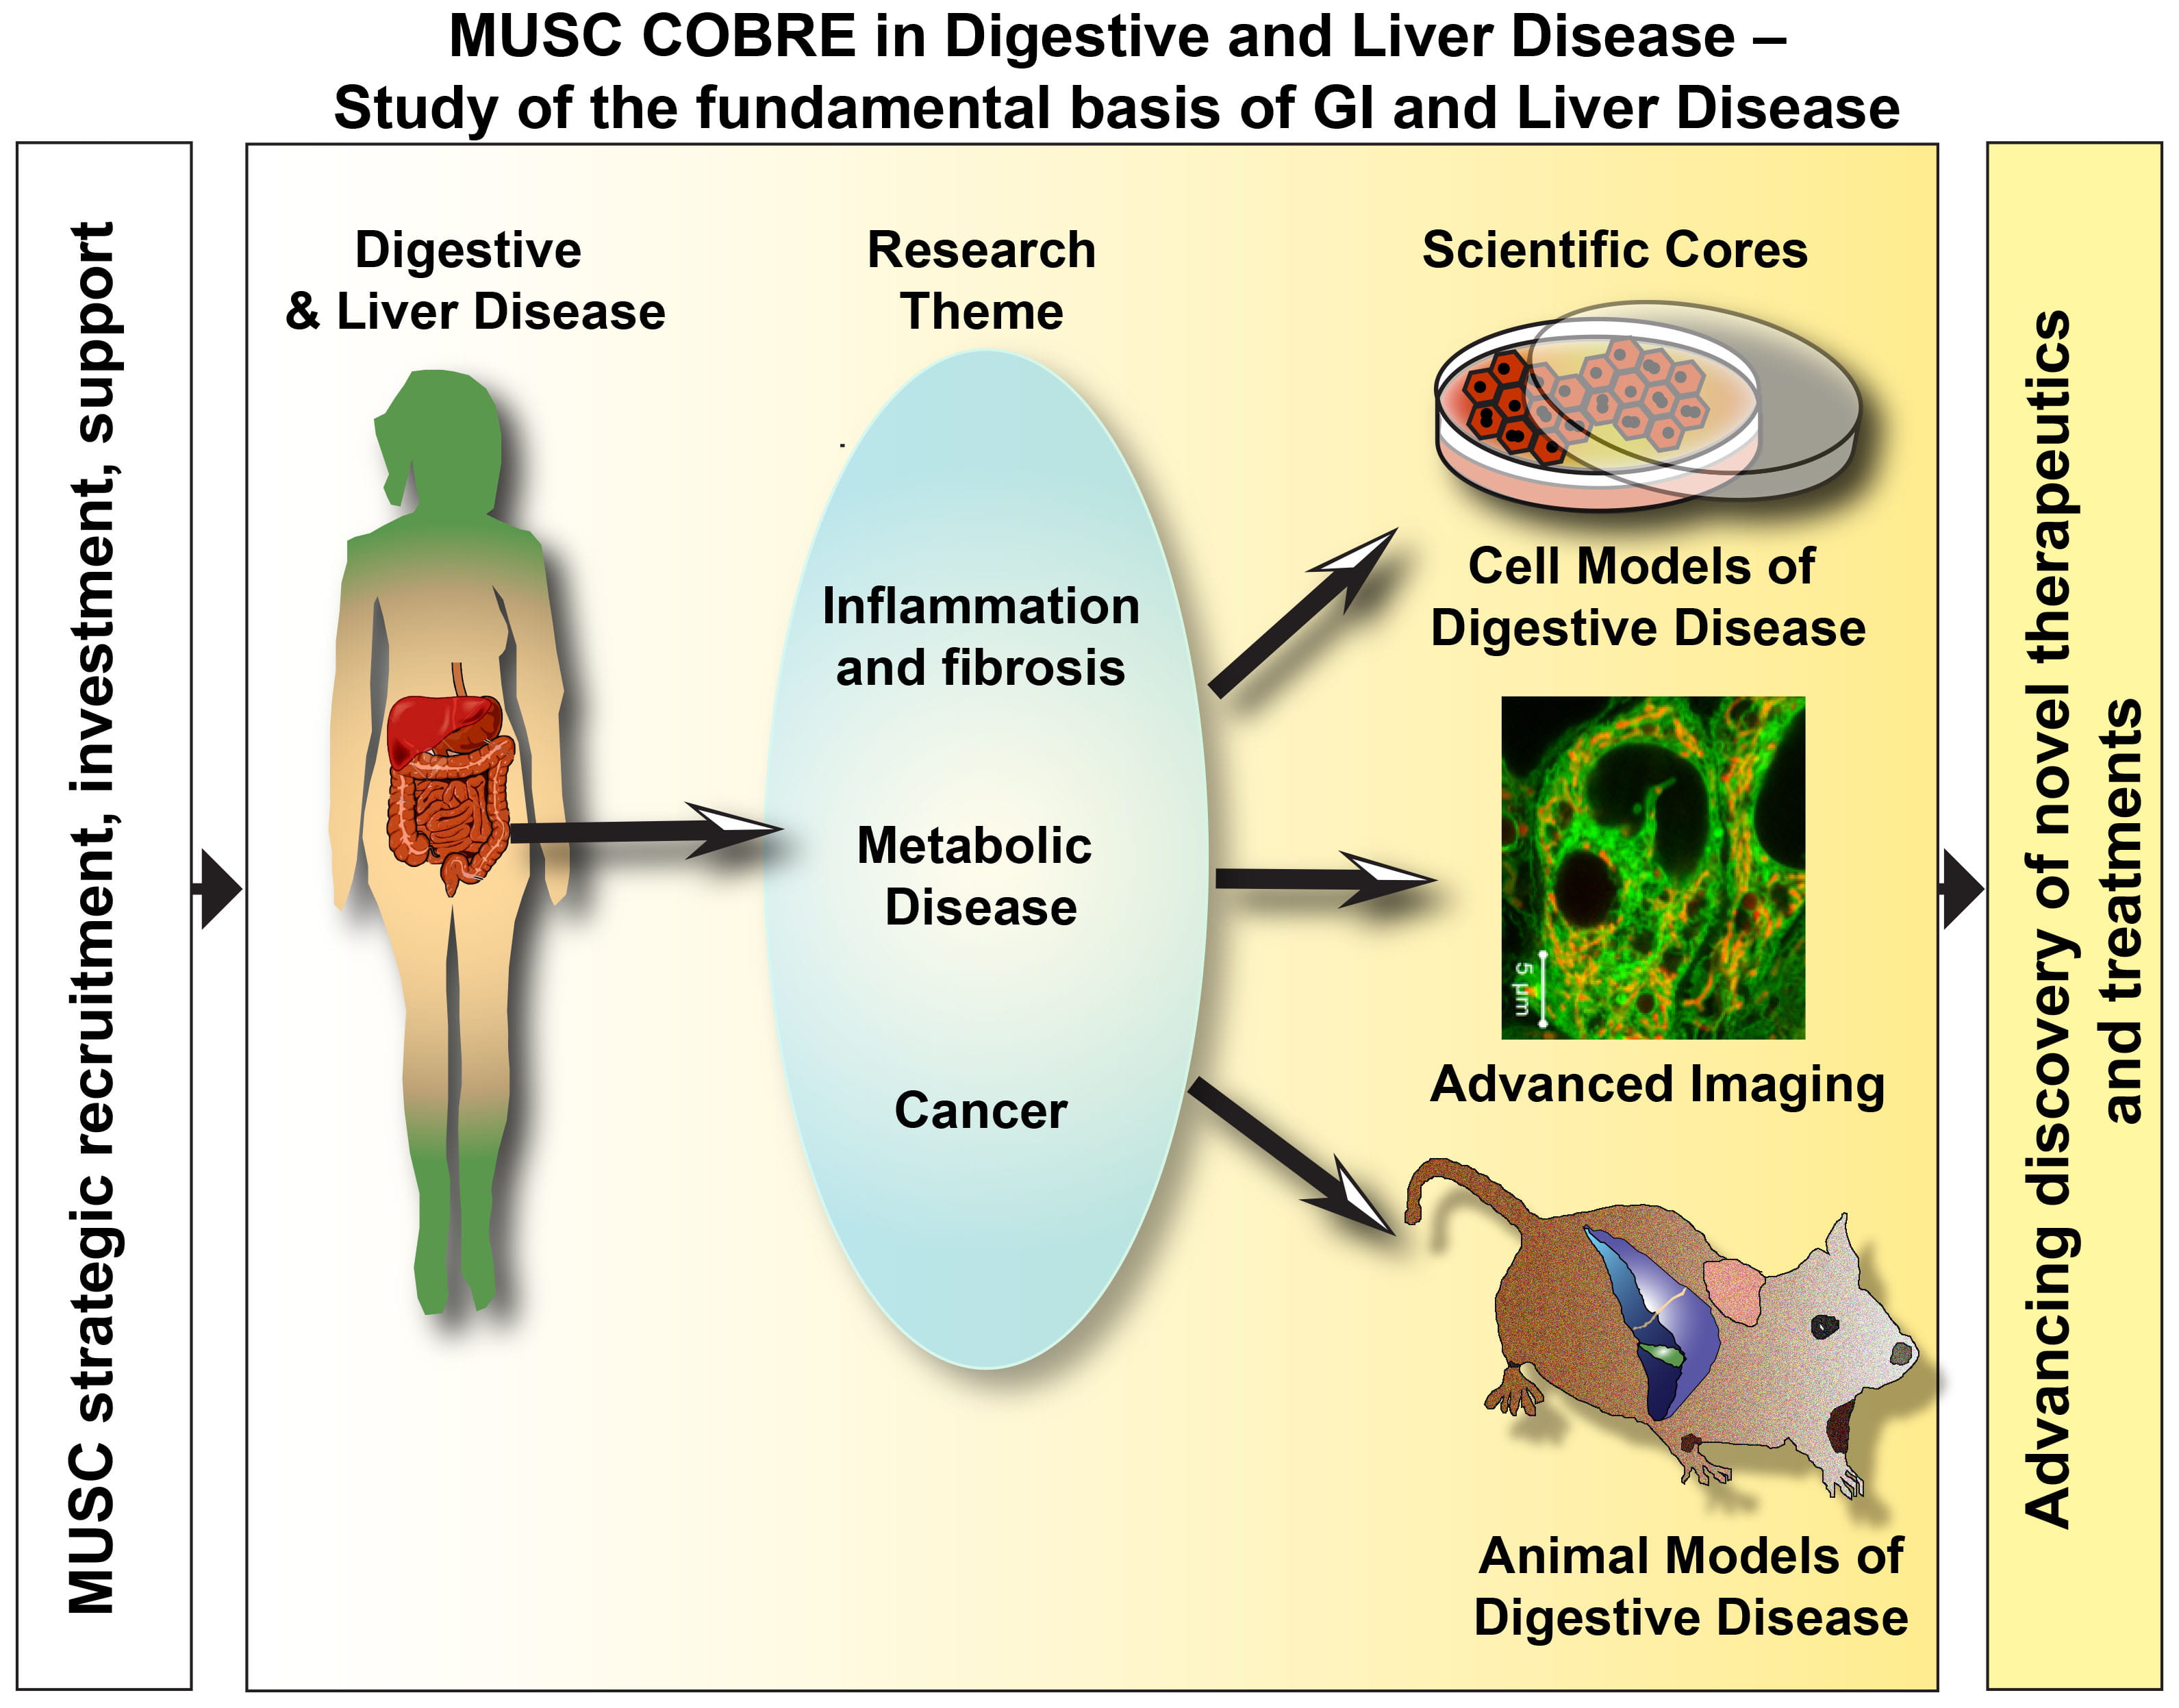 Graphical abstract of the MUSC Center for biomedical resarch excellence in digestive and liver disease